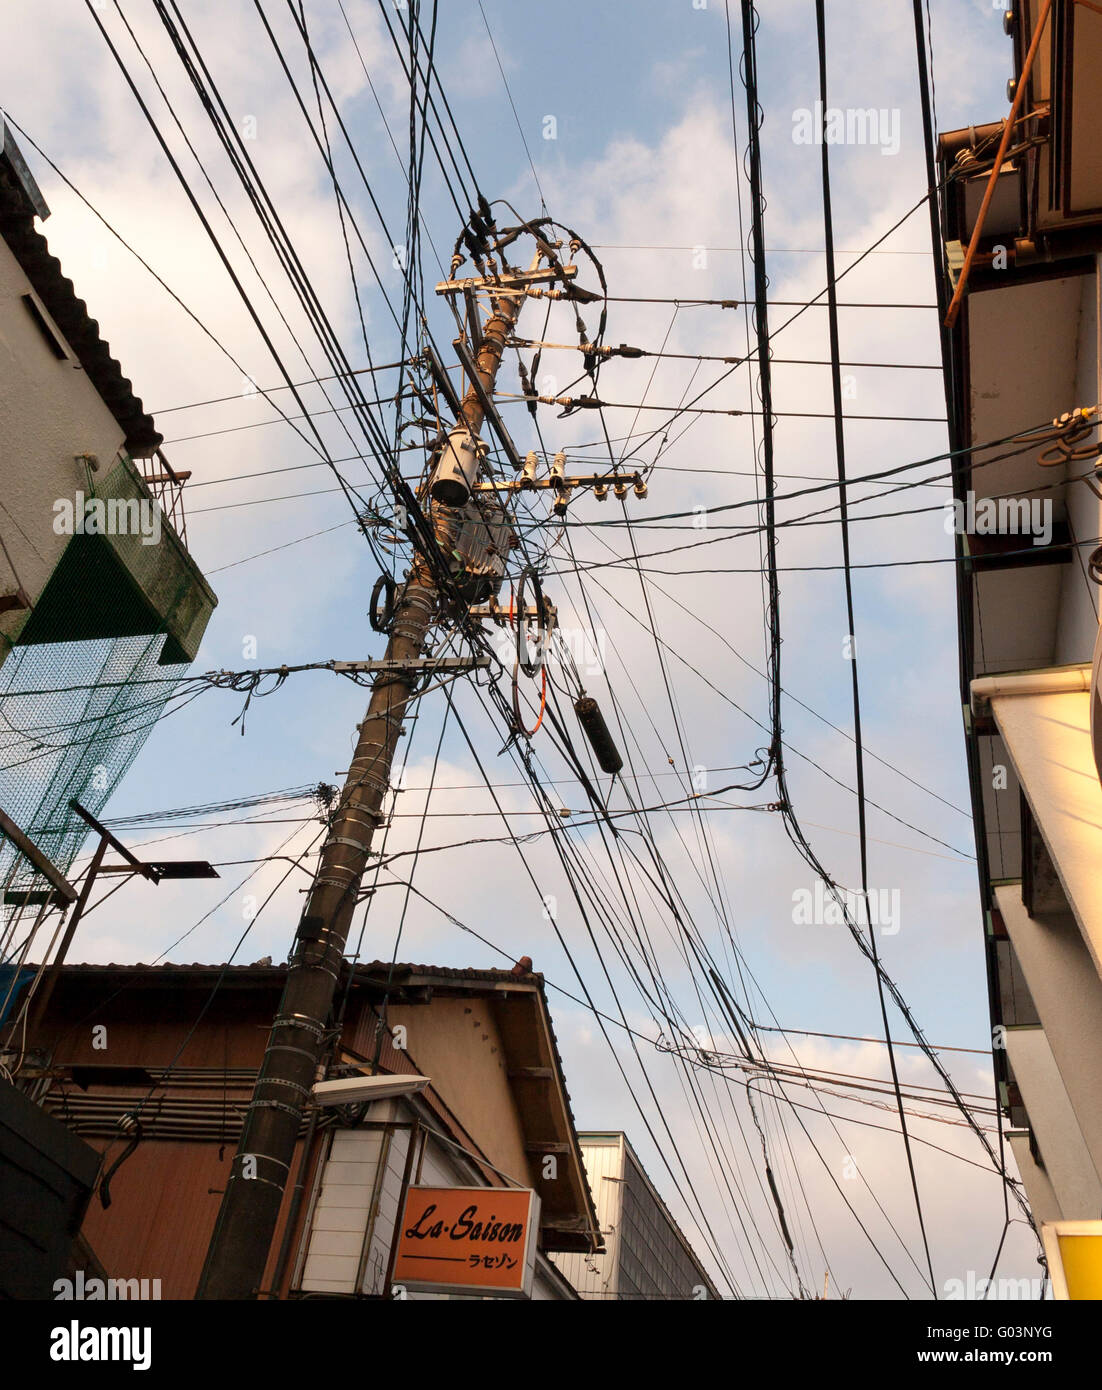 Messy overhead power cables in Japan Stock Photo